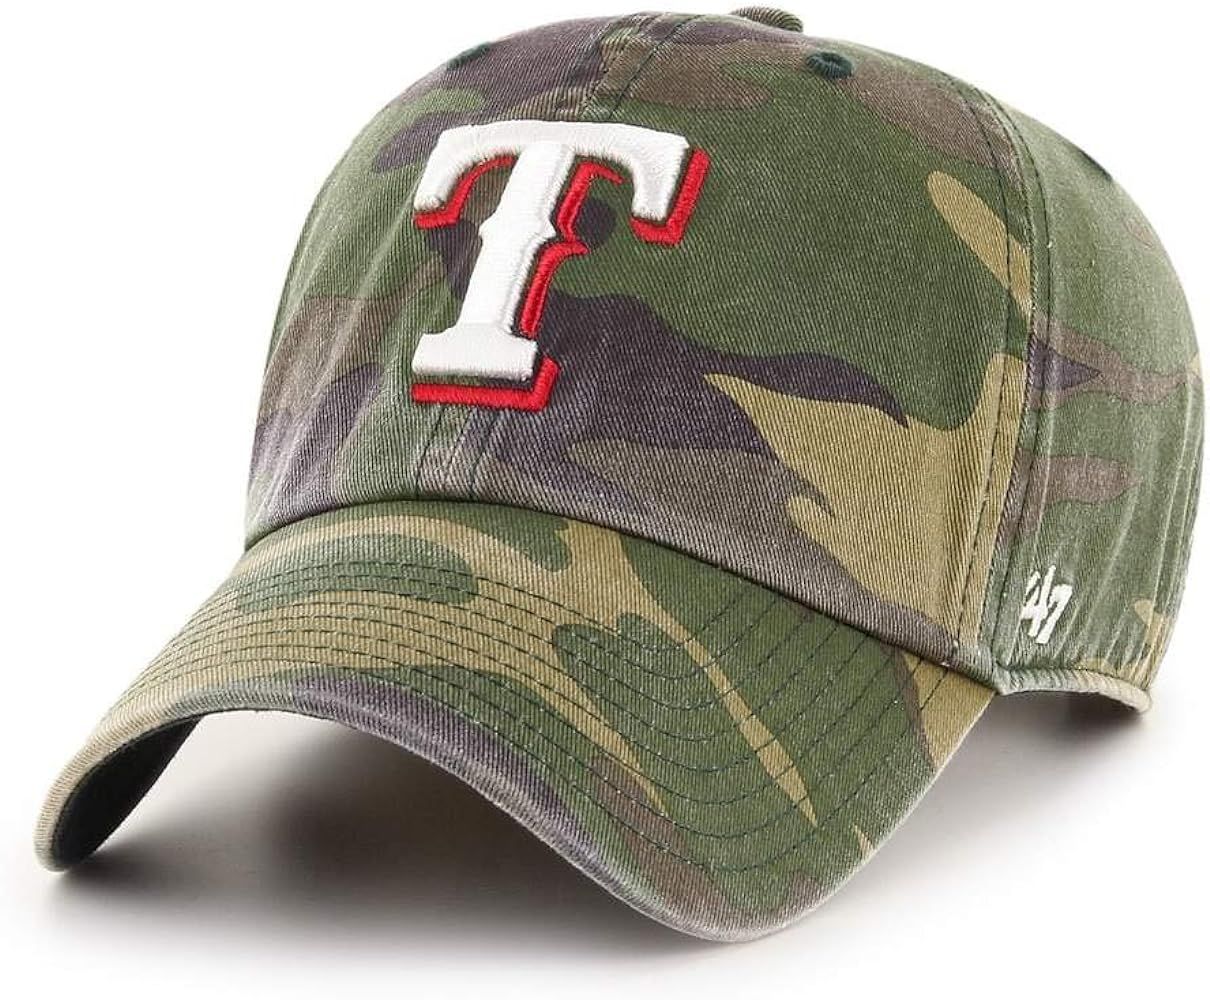 '47 MLB Camo Clean Up Adjustable Hat, Adult One Size Fits All (Texas Rangers Camo) | Amazon (US)